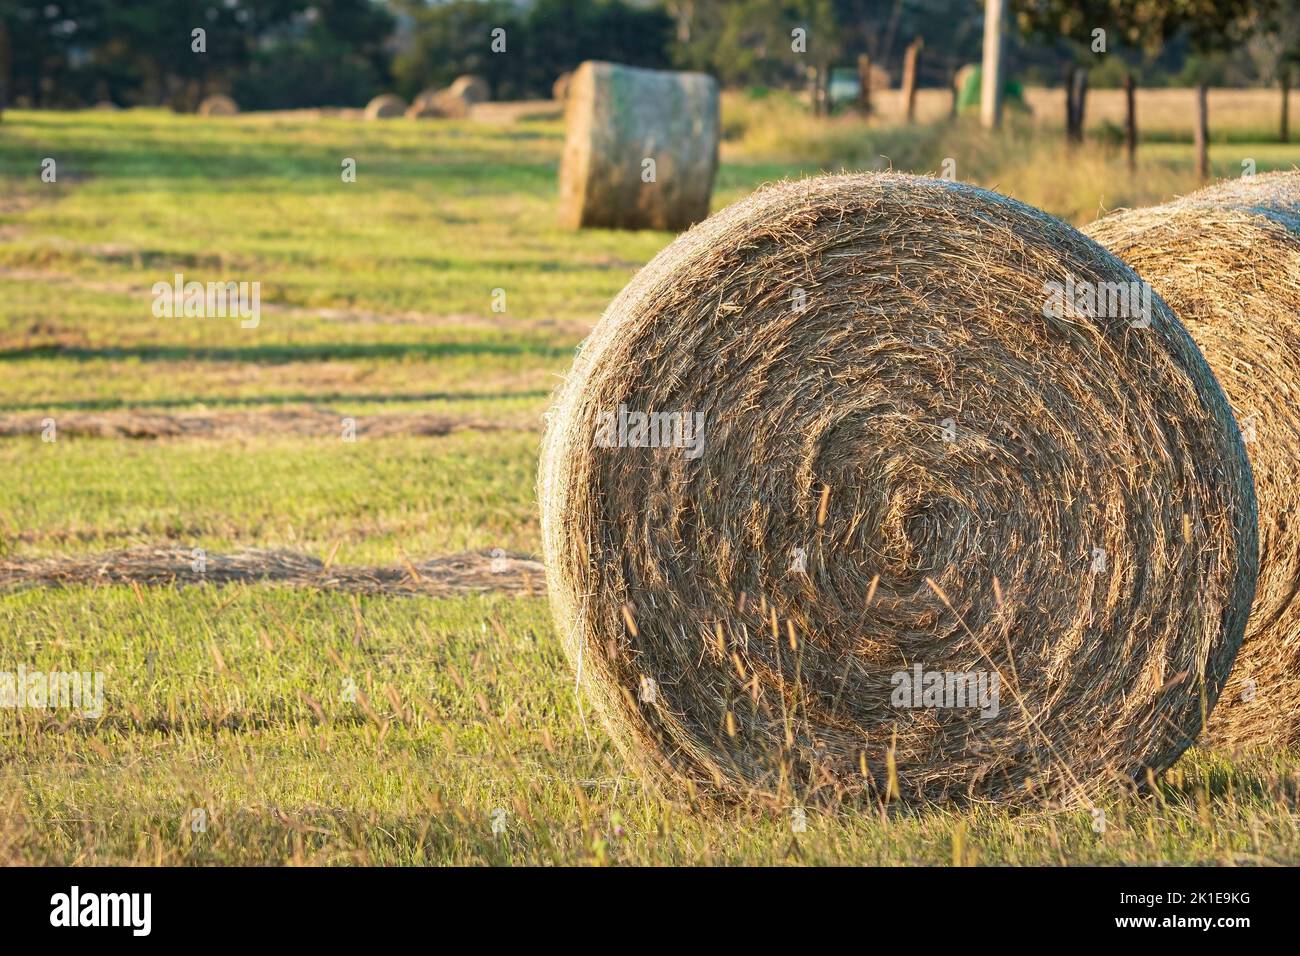 Close up of a freshly rolled round hay bale in the late afternoon sun with negative space. Stock Photo